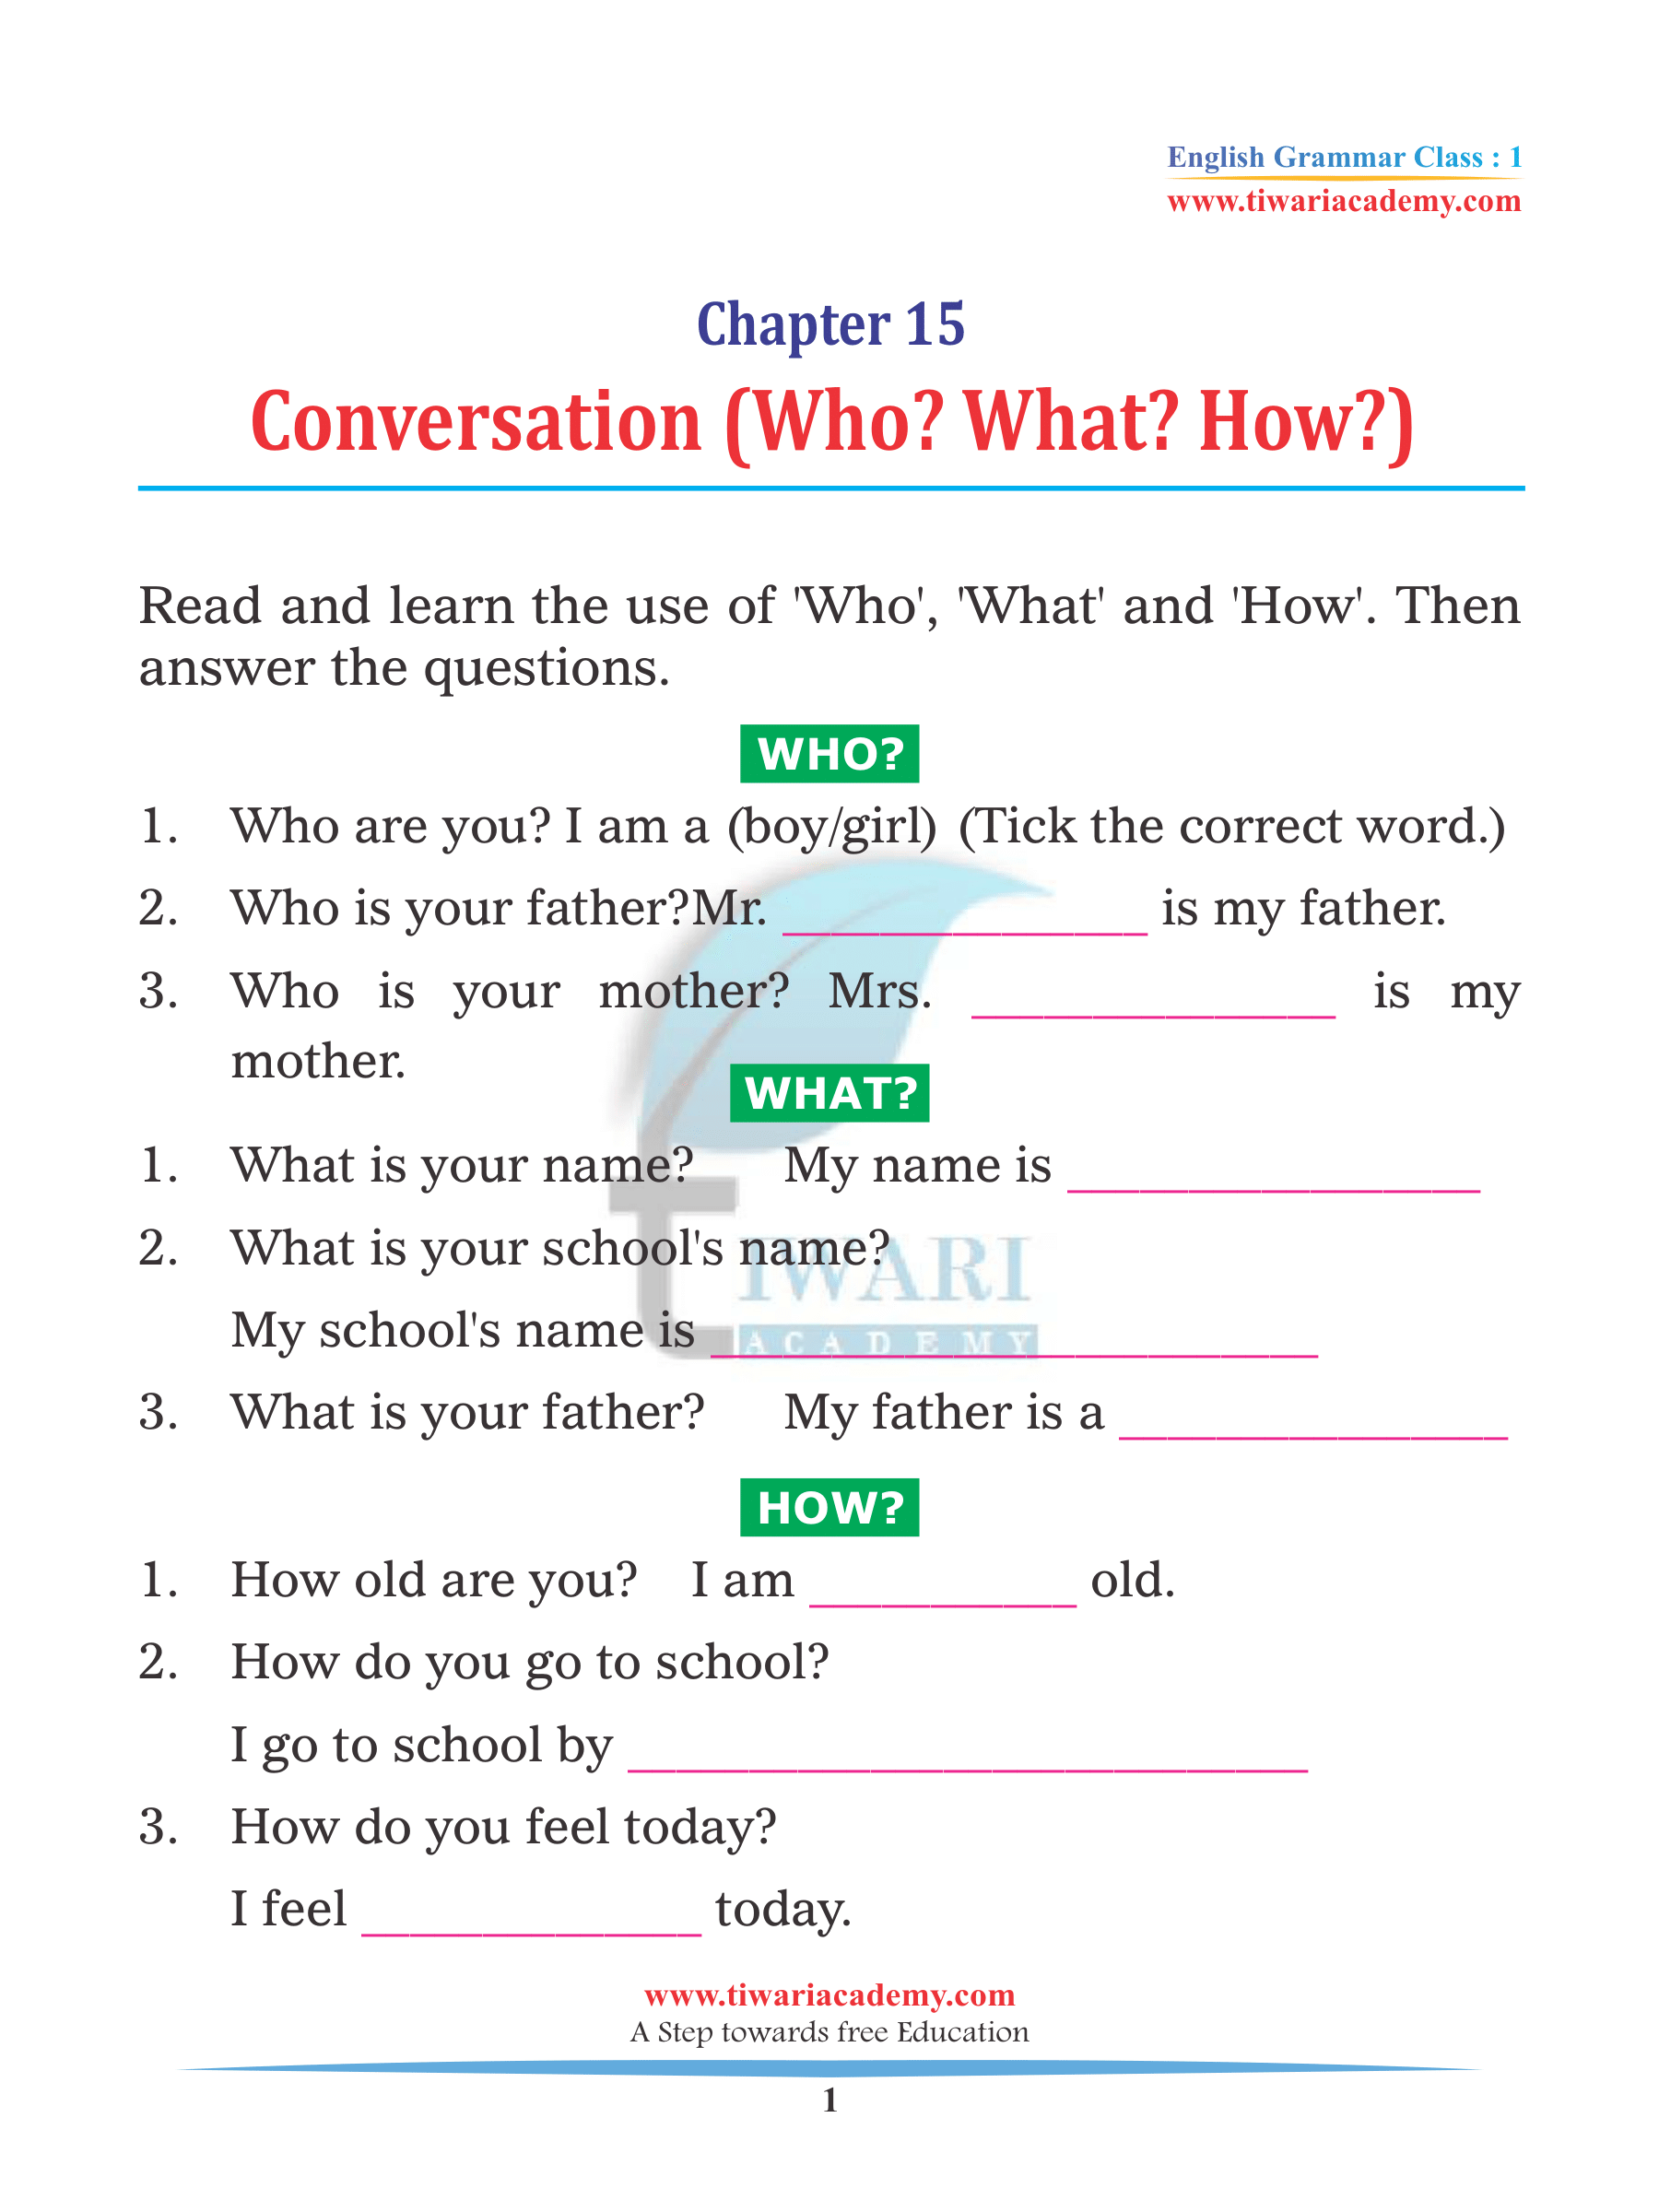 Conversation using the words Who, What, and How for grade 1 grammar